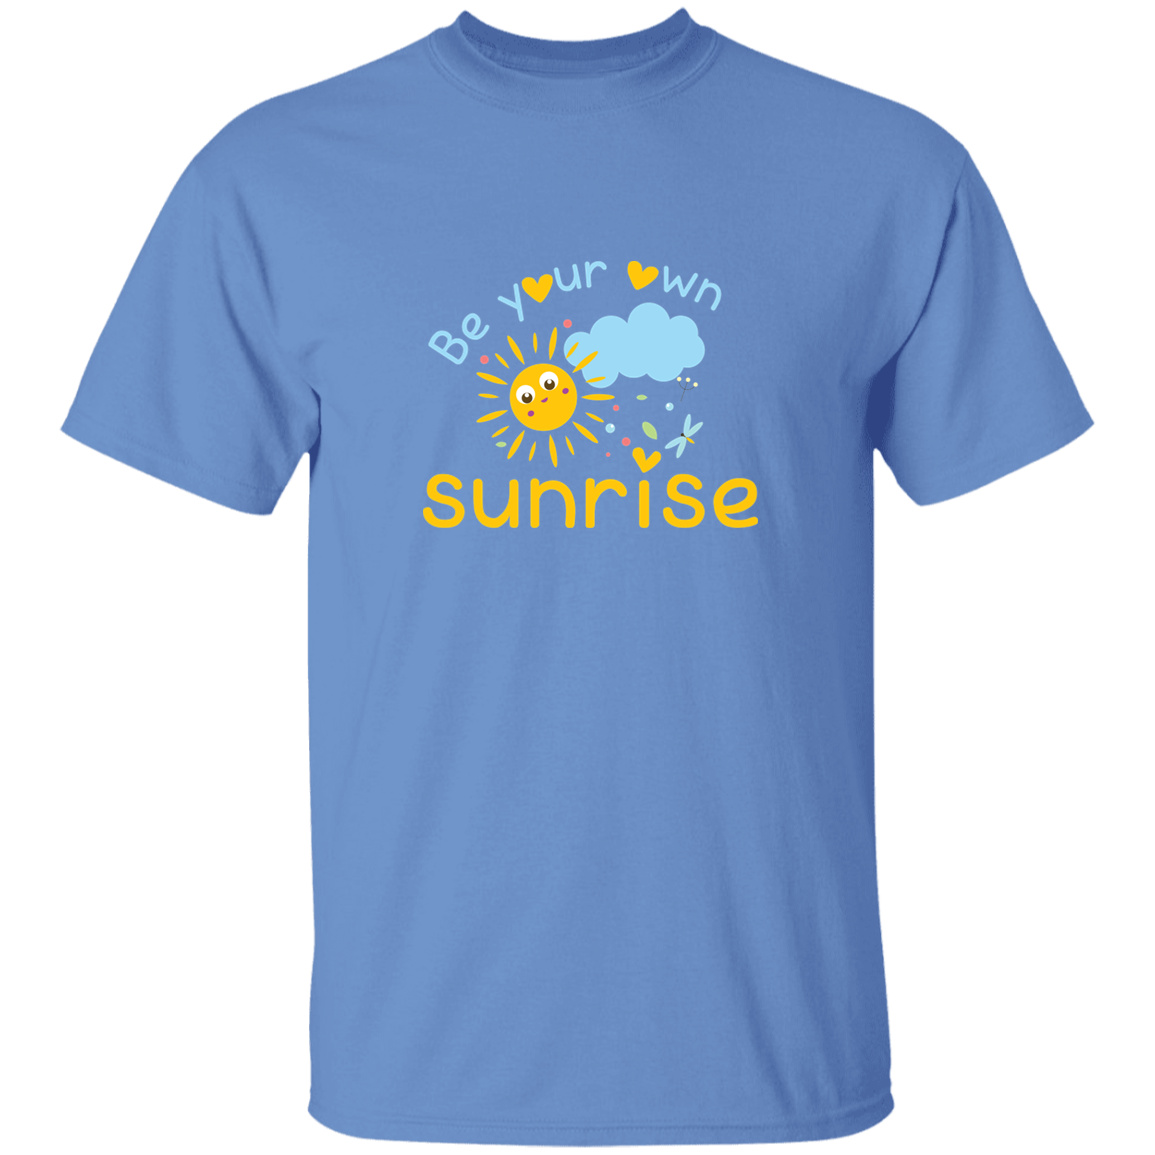 Be Your Own Sunrise - G500B Youth 5.3 oz 100% Cotton T-Shirt